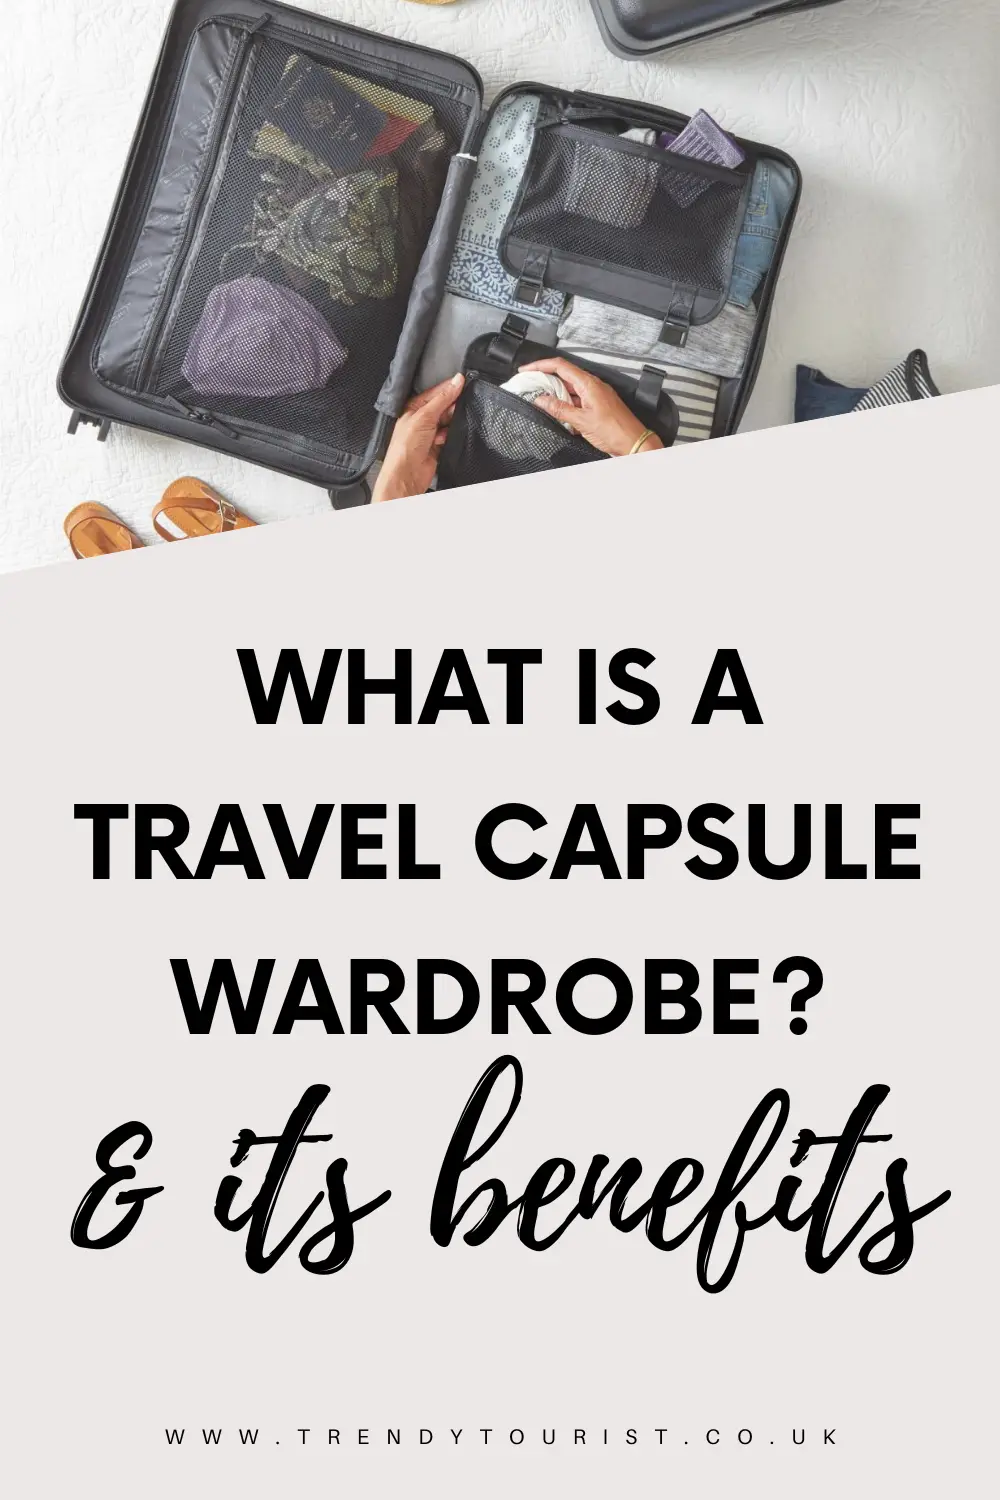 What is a Travel Capsule Wardrobe and Travel Capsule Wardrobe Benefits